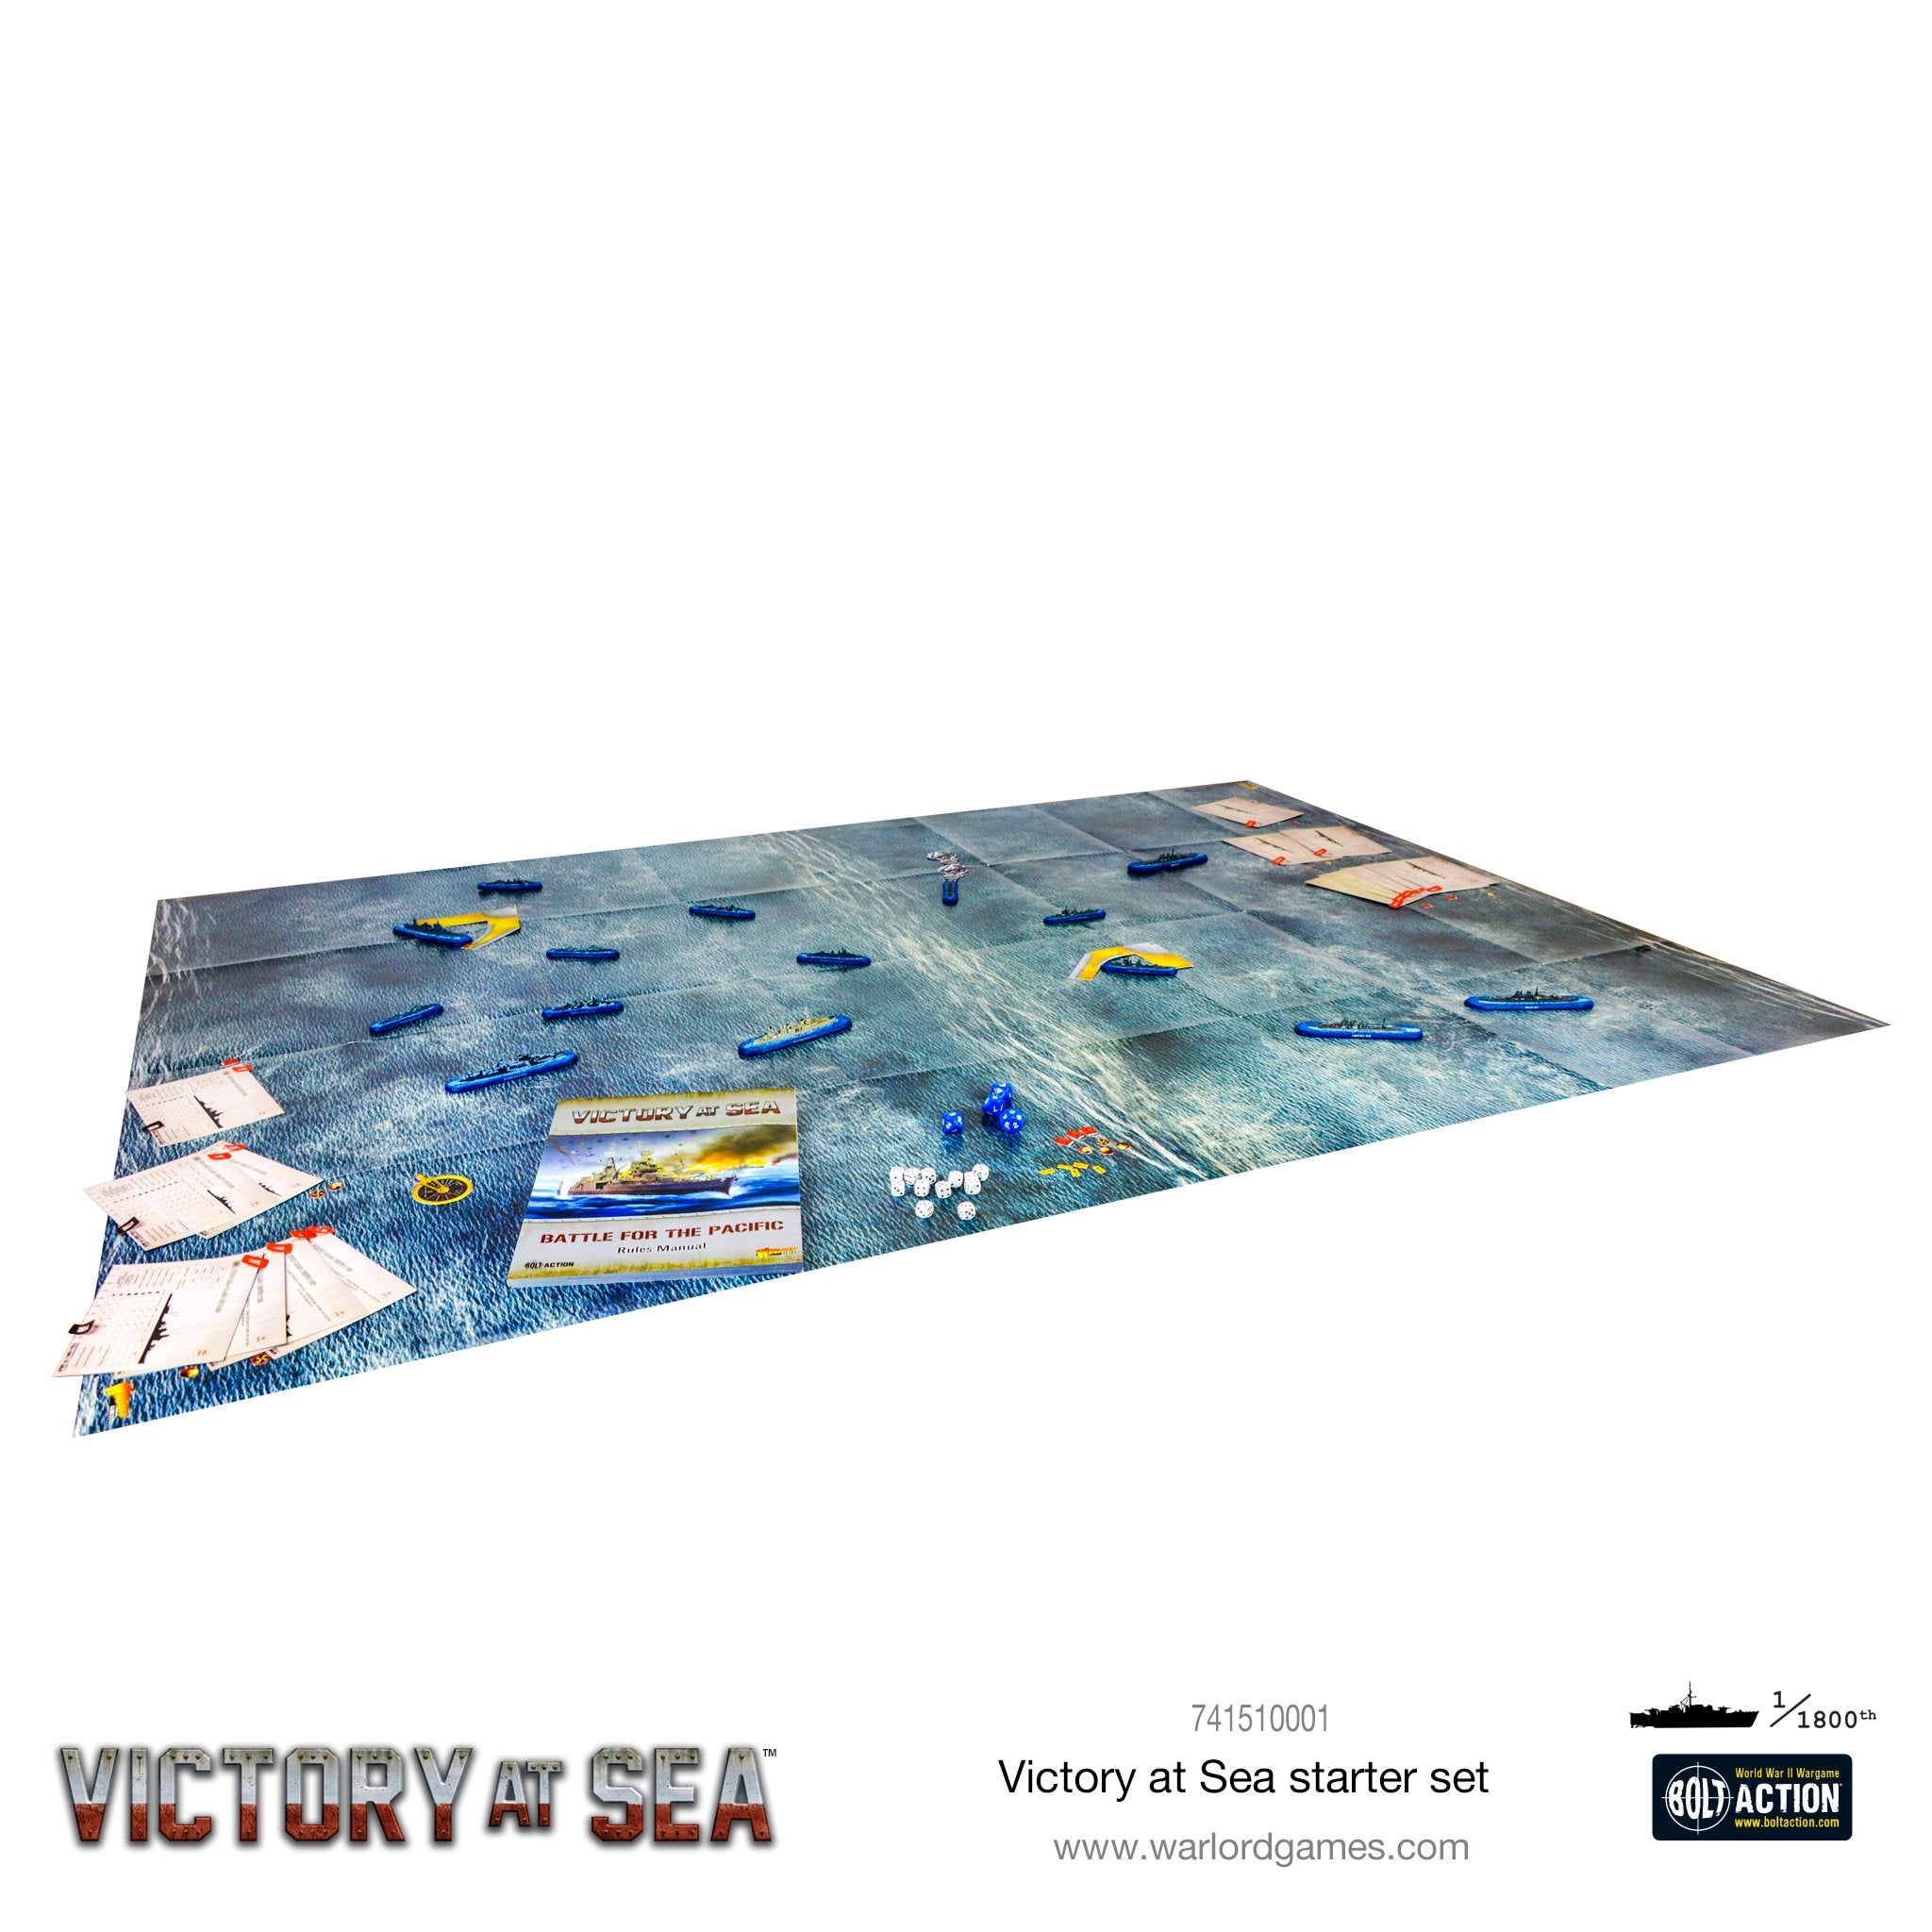 Battle for the Pacific - Victory at Sea starter game | North Valley Games